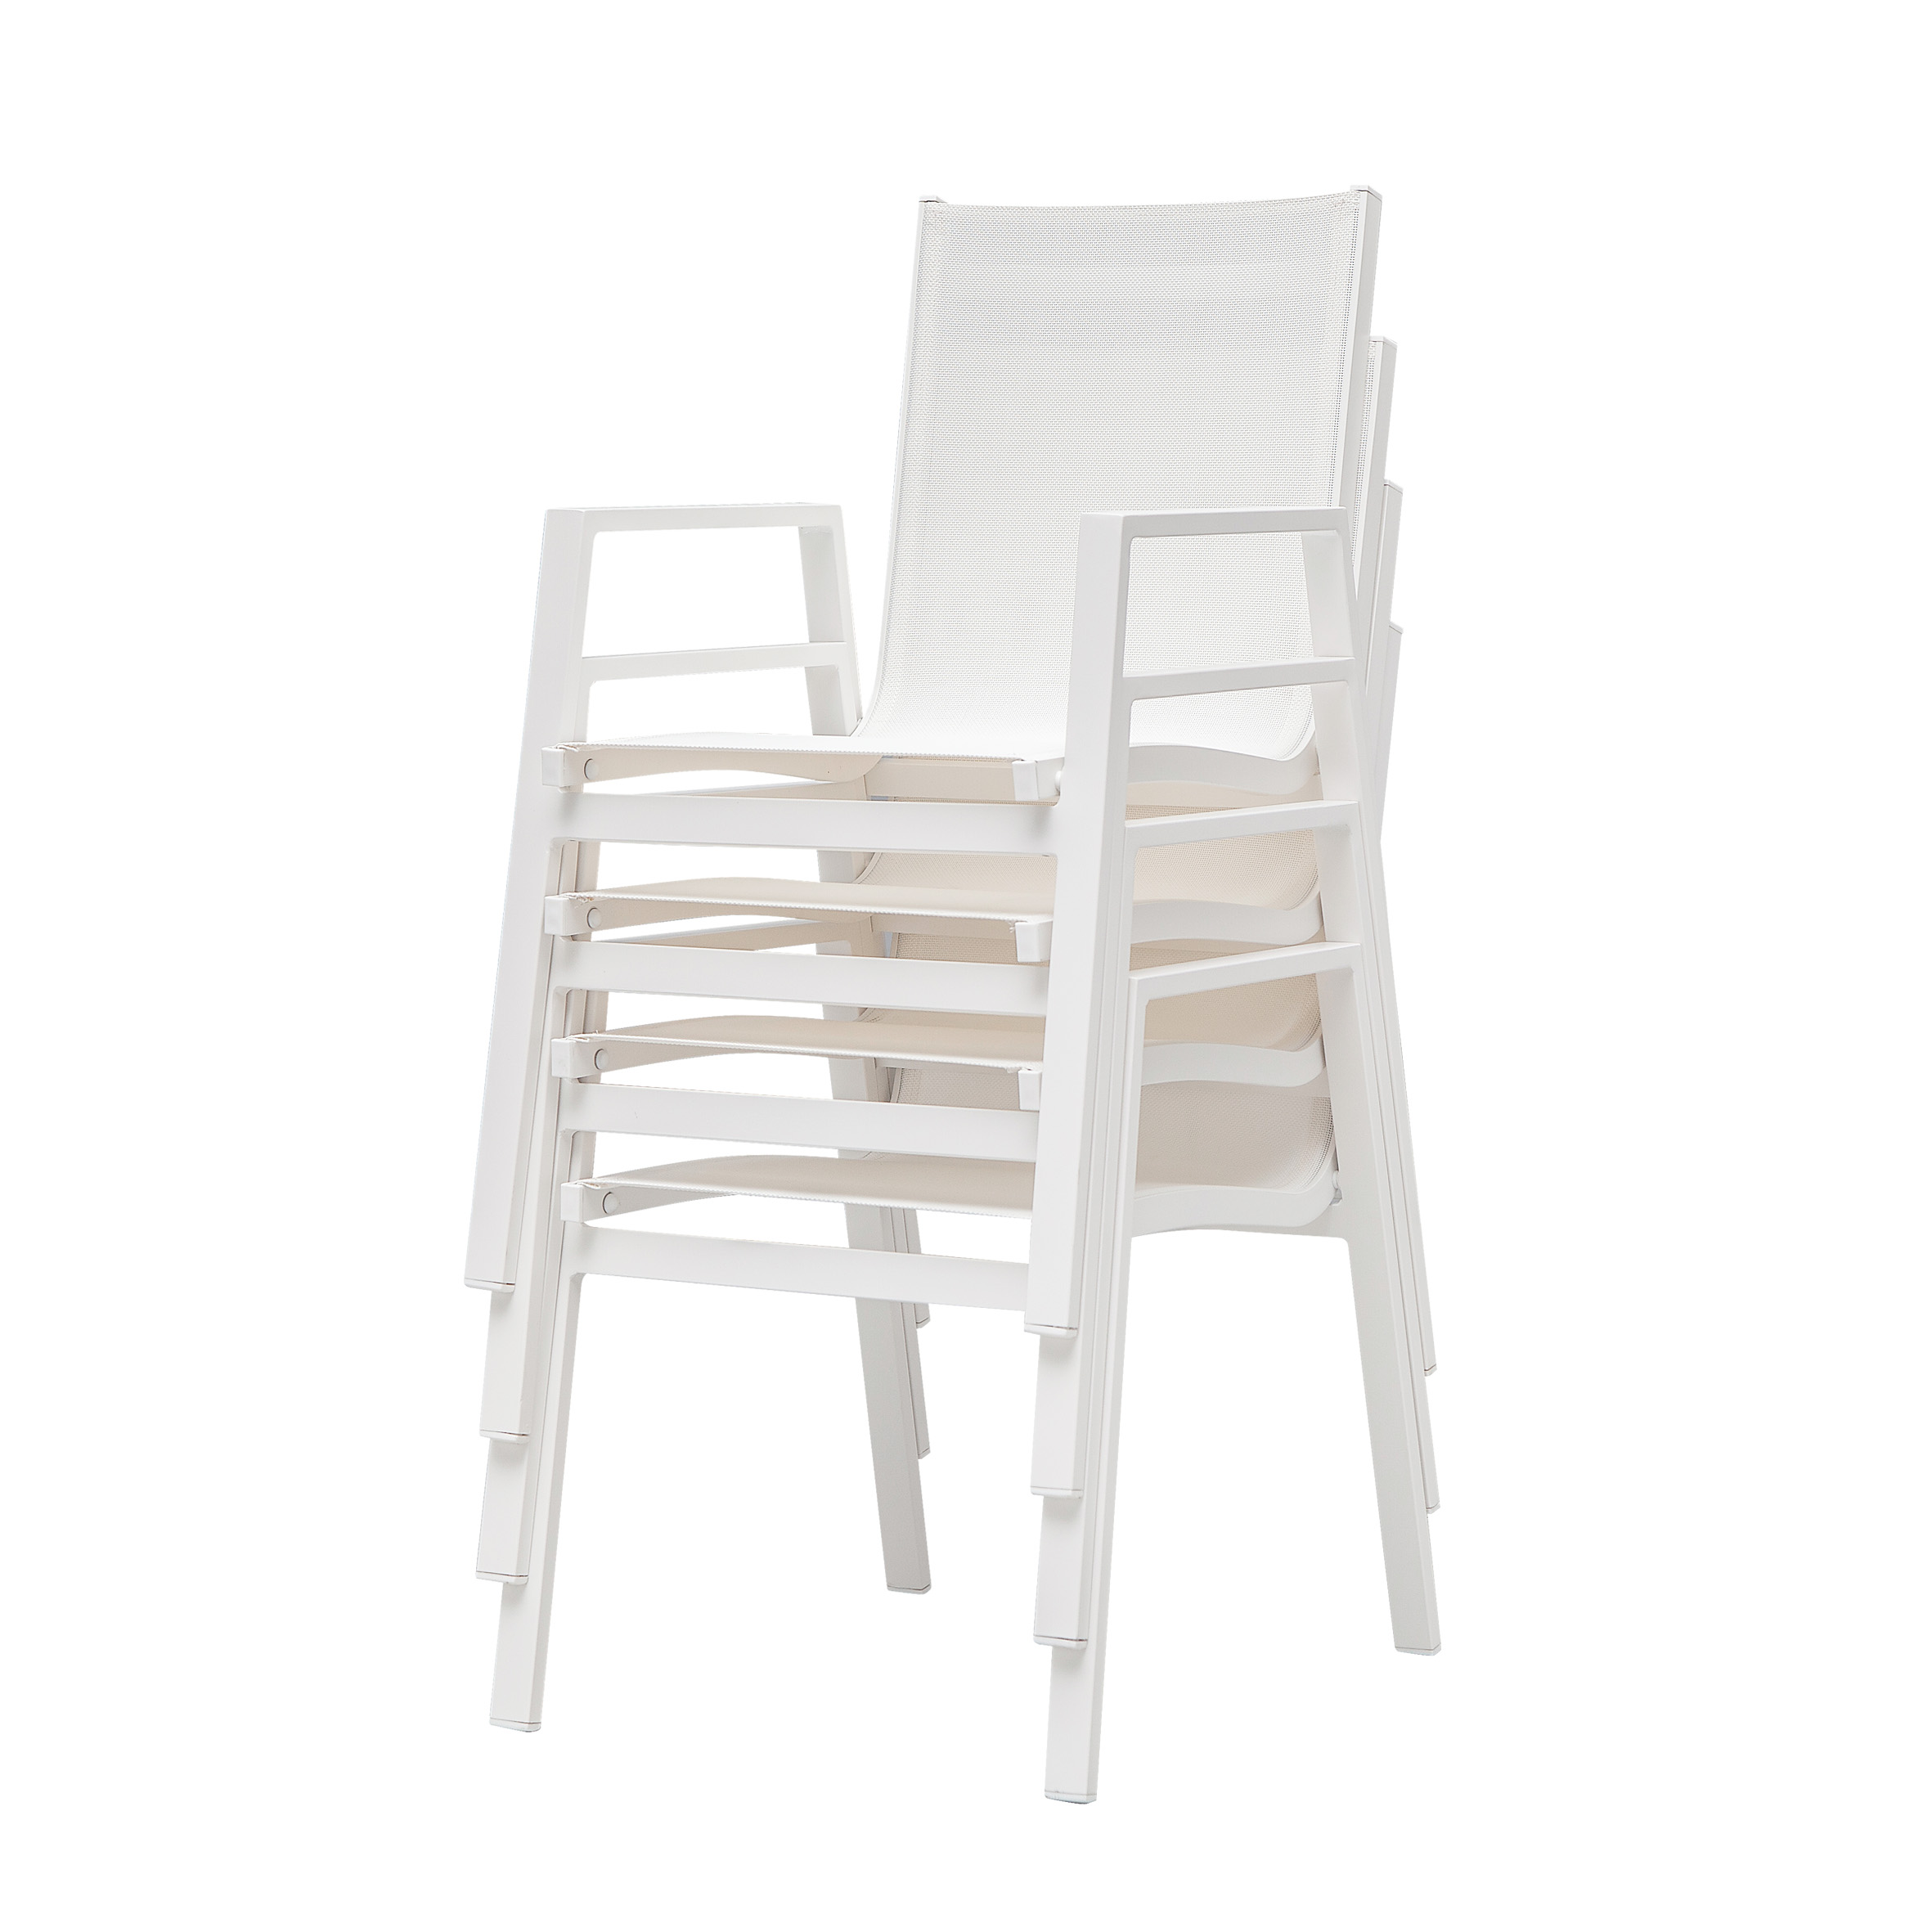 Snow white textile dining chair S5